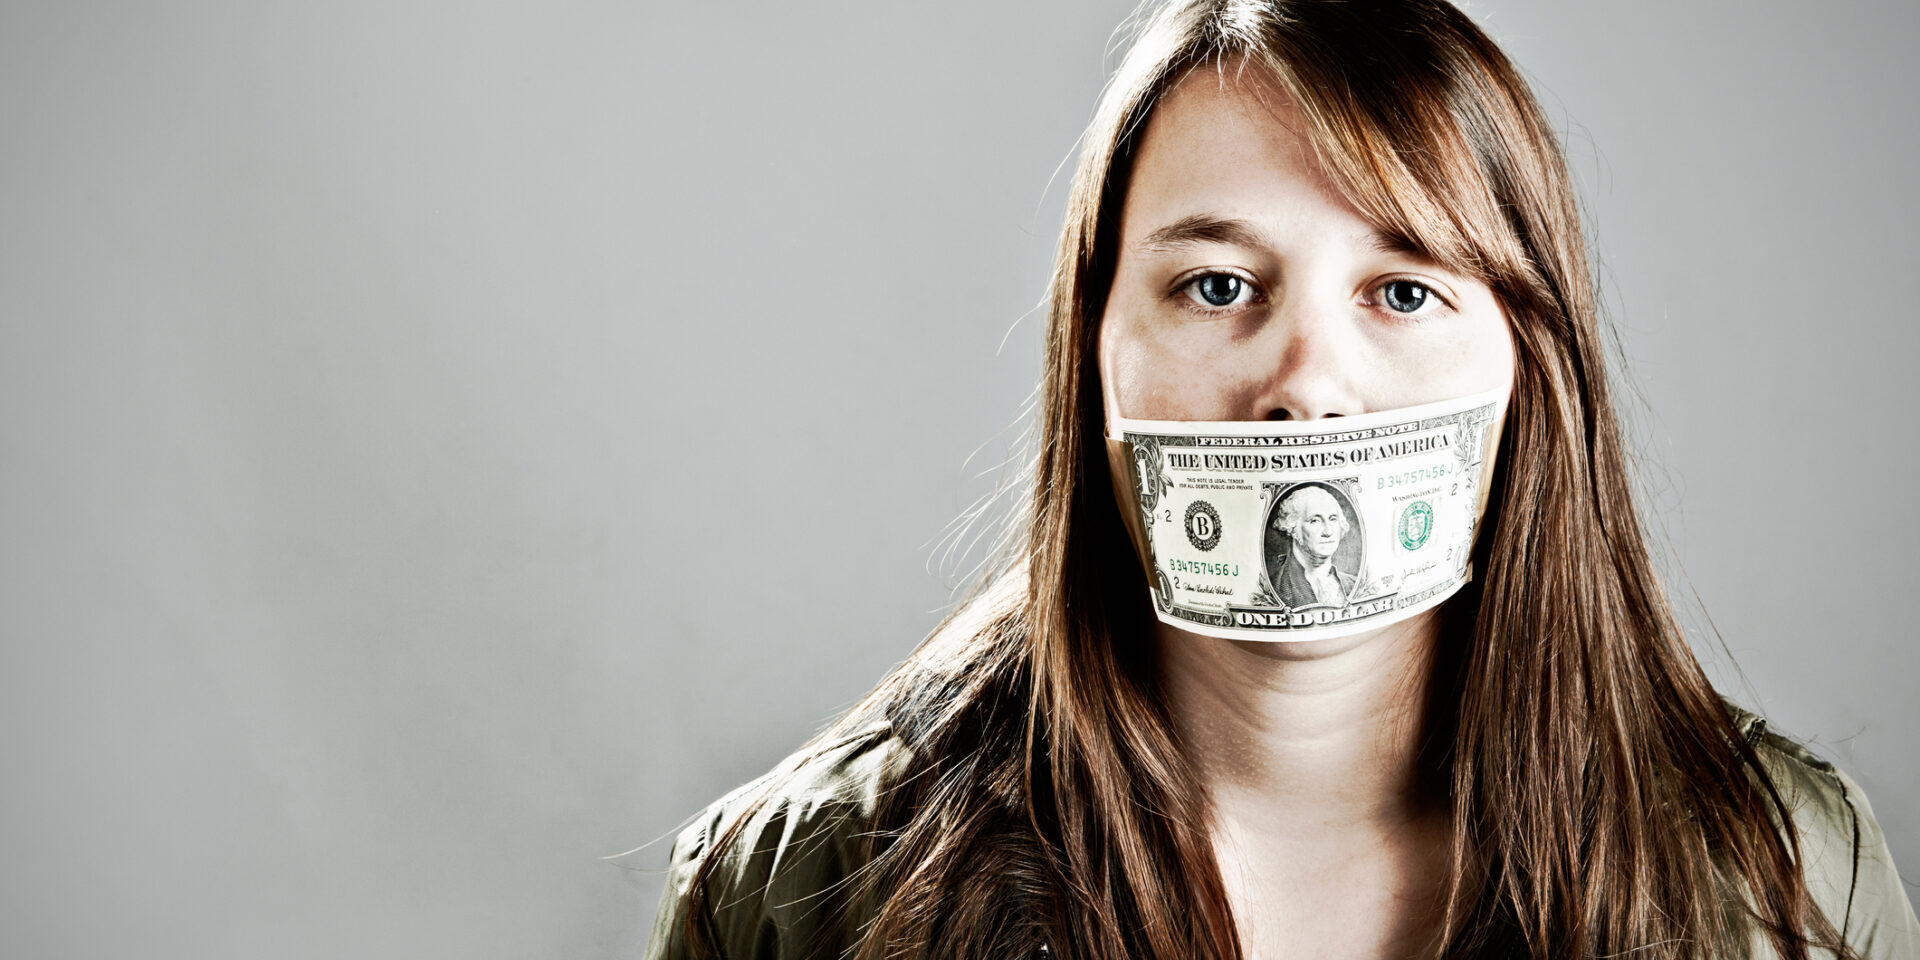 This young woman seems to have accepted being gagged with a US one dollar bill; she'll keep quiet if she's paid to!